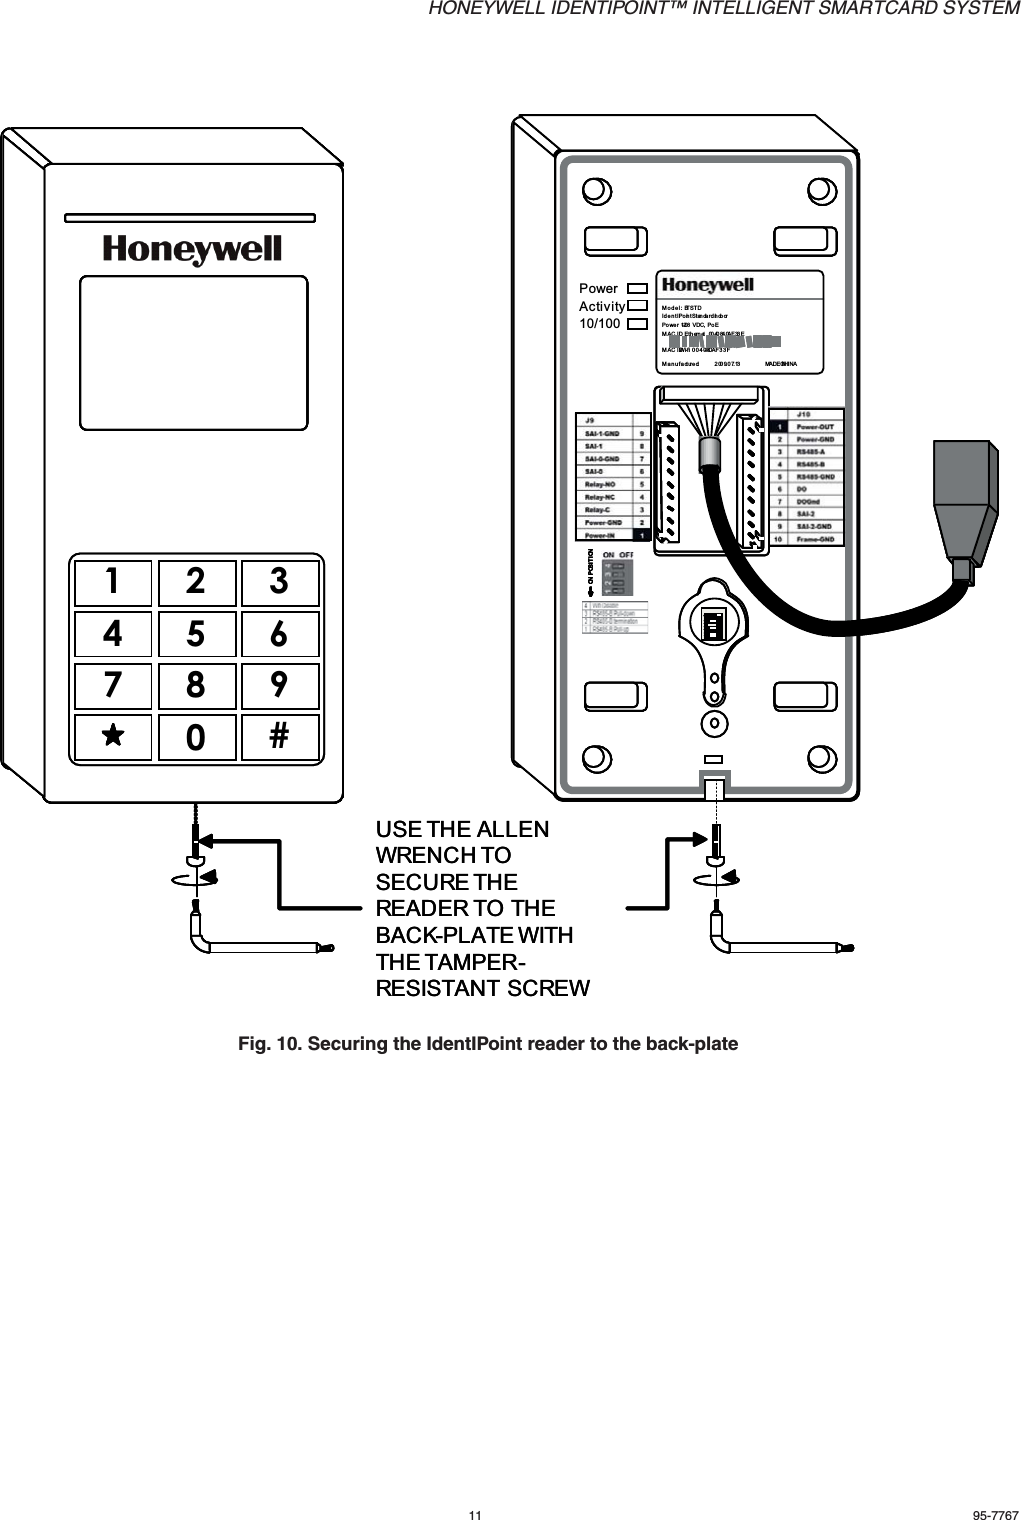 HONEYWELL IDENTIPOINT™ INTELLIGENT SMARTCARD SYSTEM11 95-7767Fig. 10. Securing the IdentIPoint reader to the back-plate10/100ActivityPowerModel: BTSTDIdentIPoint St an dard IndoorPower 1 0-2 8  VDC, PoEM AC ID Eth ernet   00 40 84 0A F 33 EMAC ID Wi-fi 00408-IOAF33FManufactured:             2009.07.13                    MA DE  IN CHINAON POSITIONON POSITIONON POSITIONON POSITION12341234123412341234USE THE ALLEN WRENCH TO SECURE THE READER TO THE BACK-PLATE WITH THE TAMPER-RESISTANT SCREW1234567890#10/100ActivityPowerModel: BTSTDIdentIPoint St an dard IndoorPower 1 0-2 8  VDC, PoEM AC ID Eth ernet   00 40 84 0A F 33 EMAC ID Wi-fi 00408-IOAF33FManufactured:             2009.07.13                    MA DE  IN CHINAON POSITIONON POSITIONON POSITIONON POSITION12341234123412341234USE THE ALLEN WRENCH TO SECURE THE READER TO THE BACK-PLATE WITH THE TAMPER-RESISTANT SCREW1234567890#